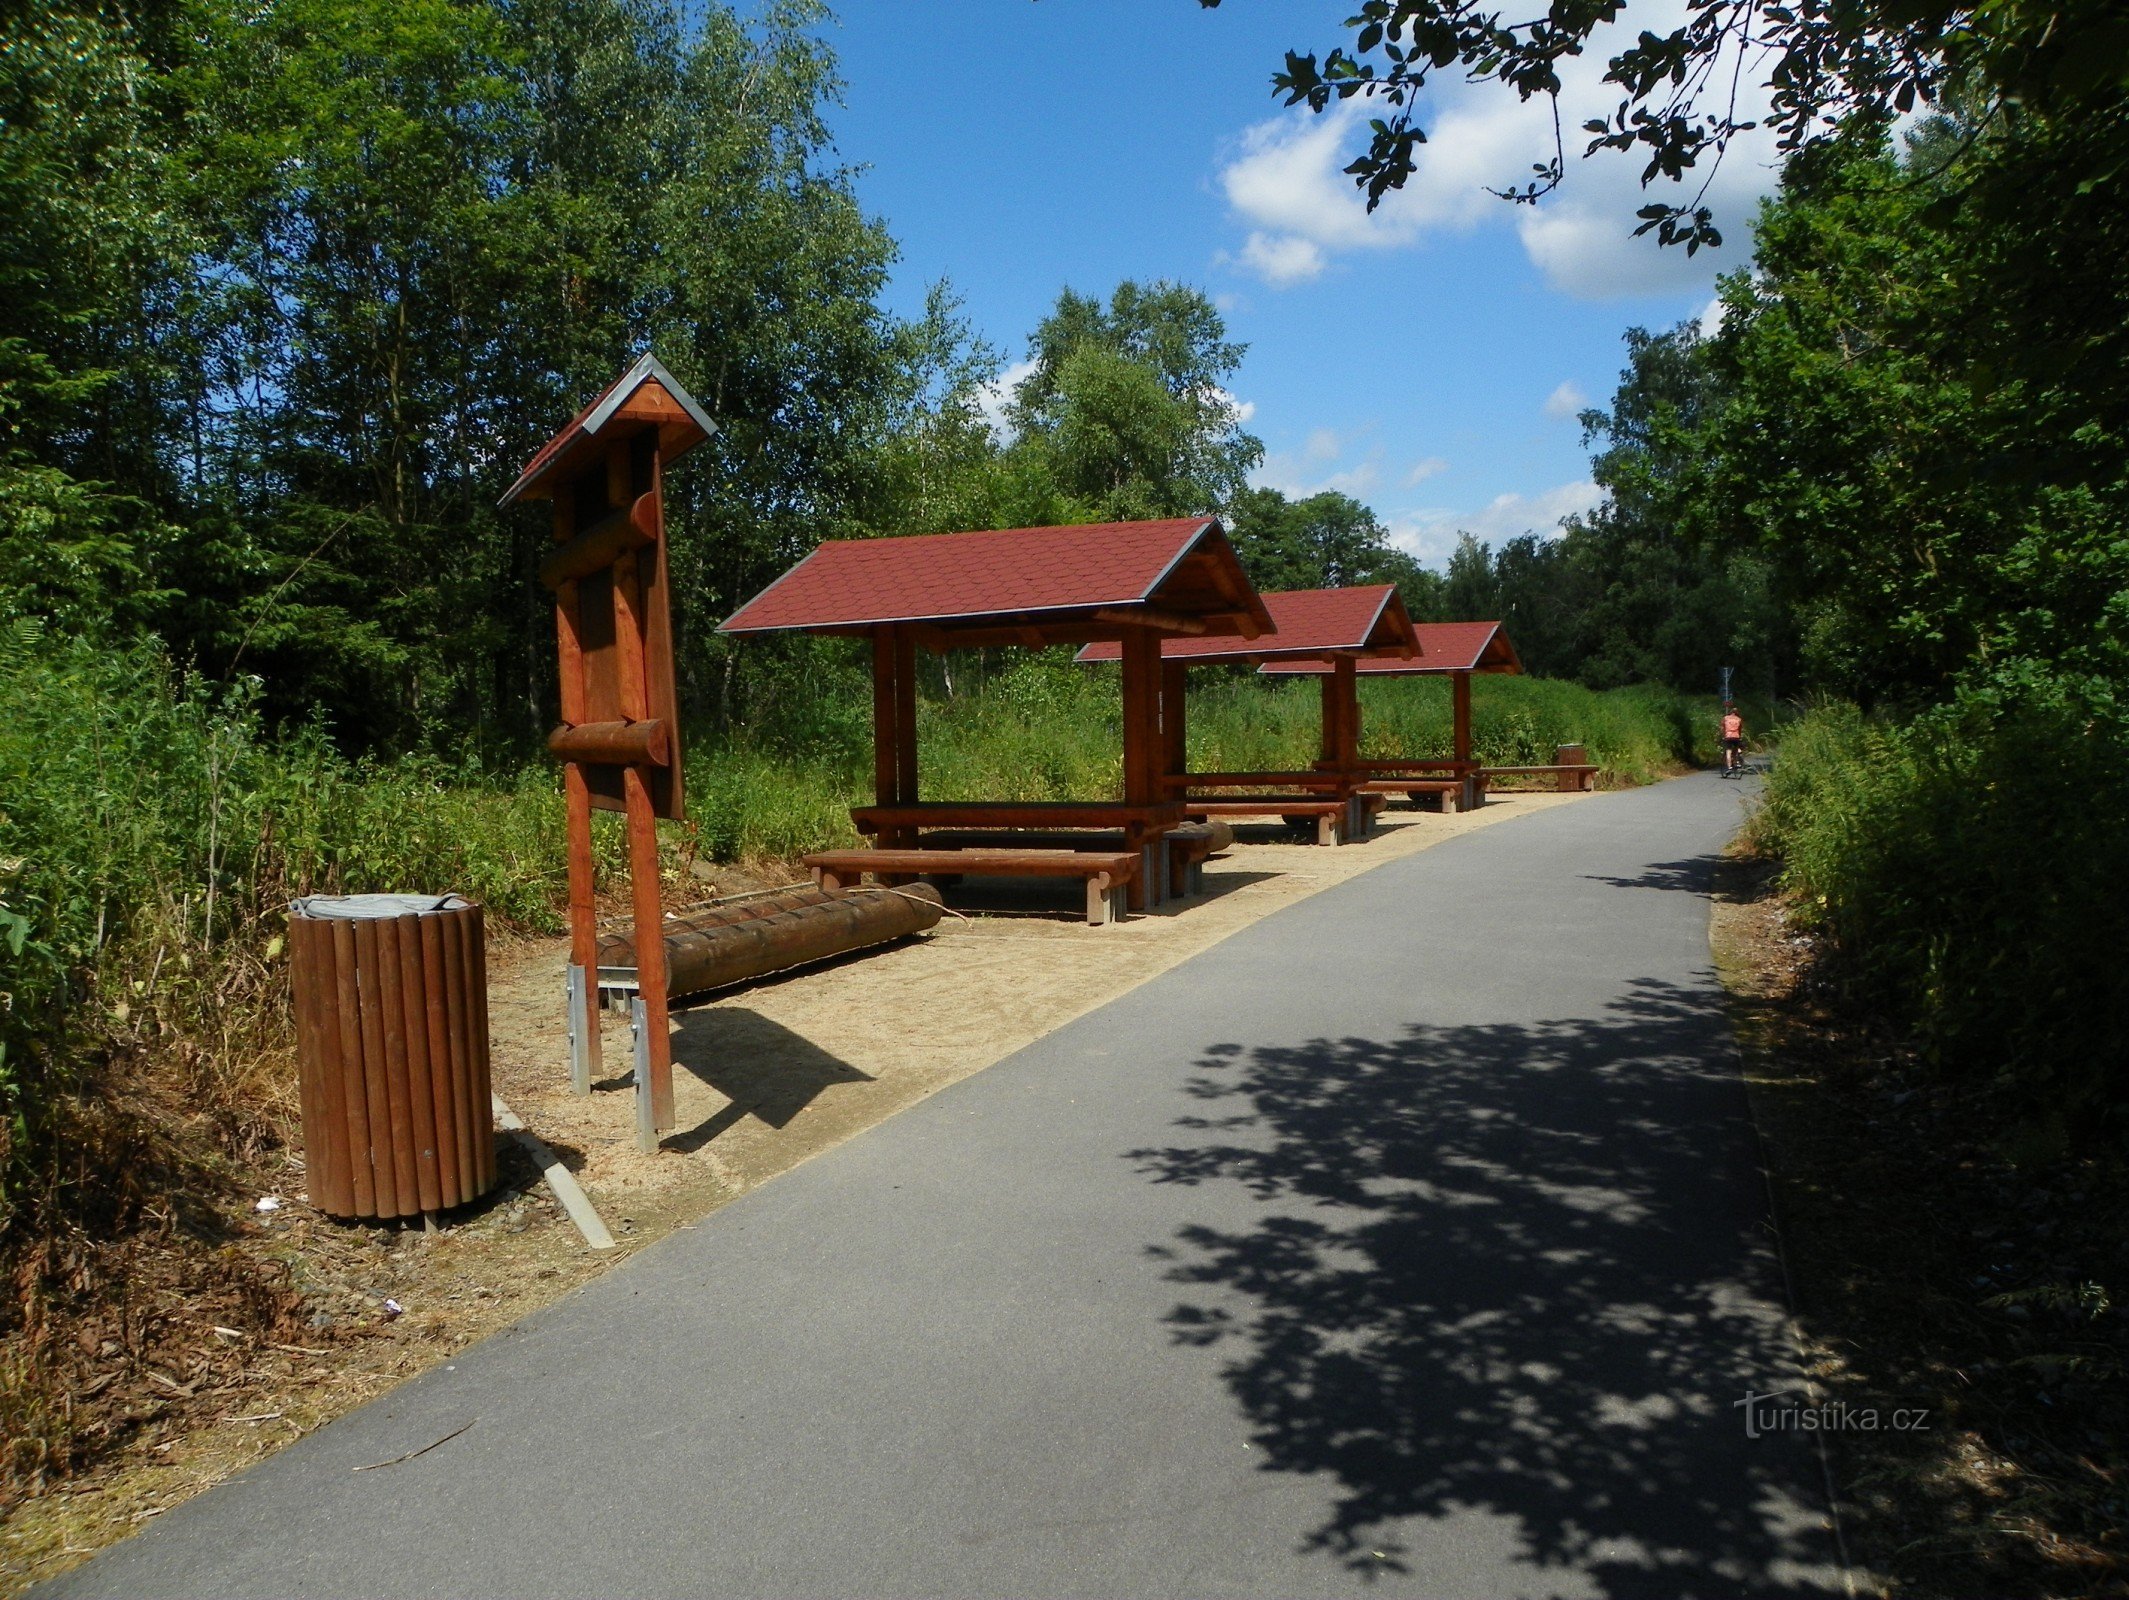 Rest area on the cycle path near Ronov